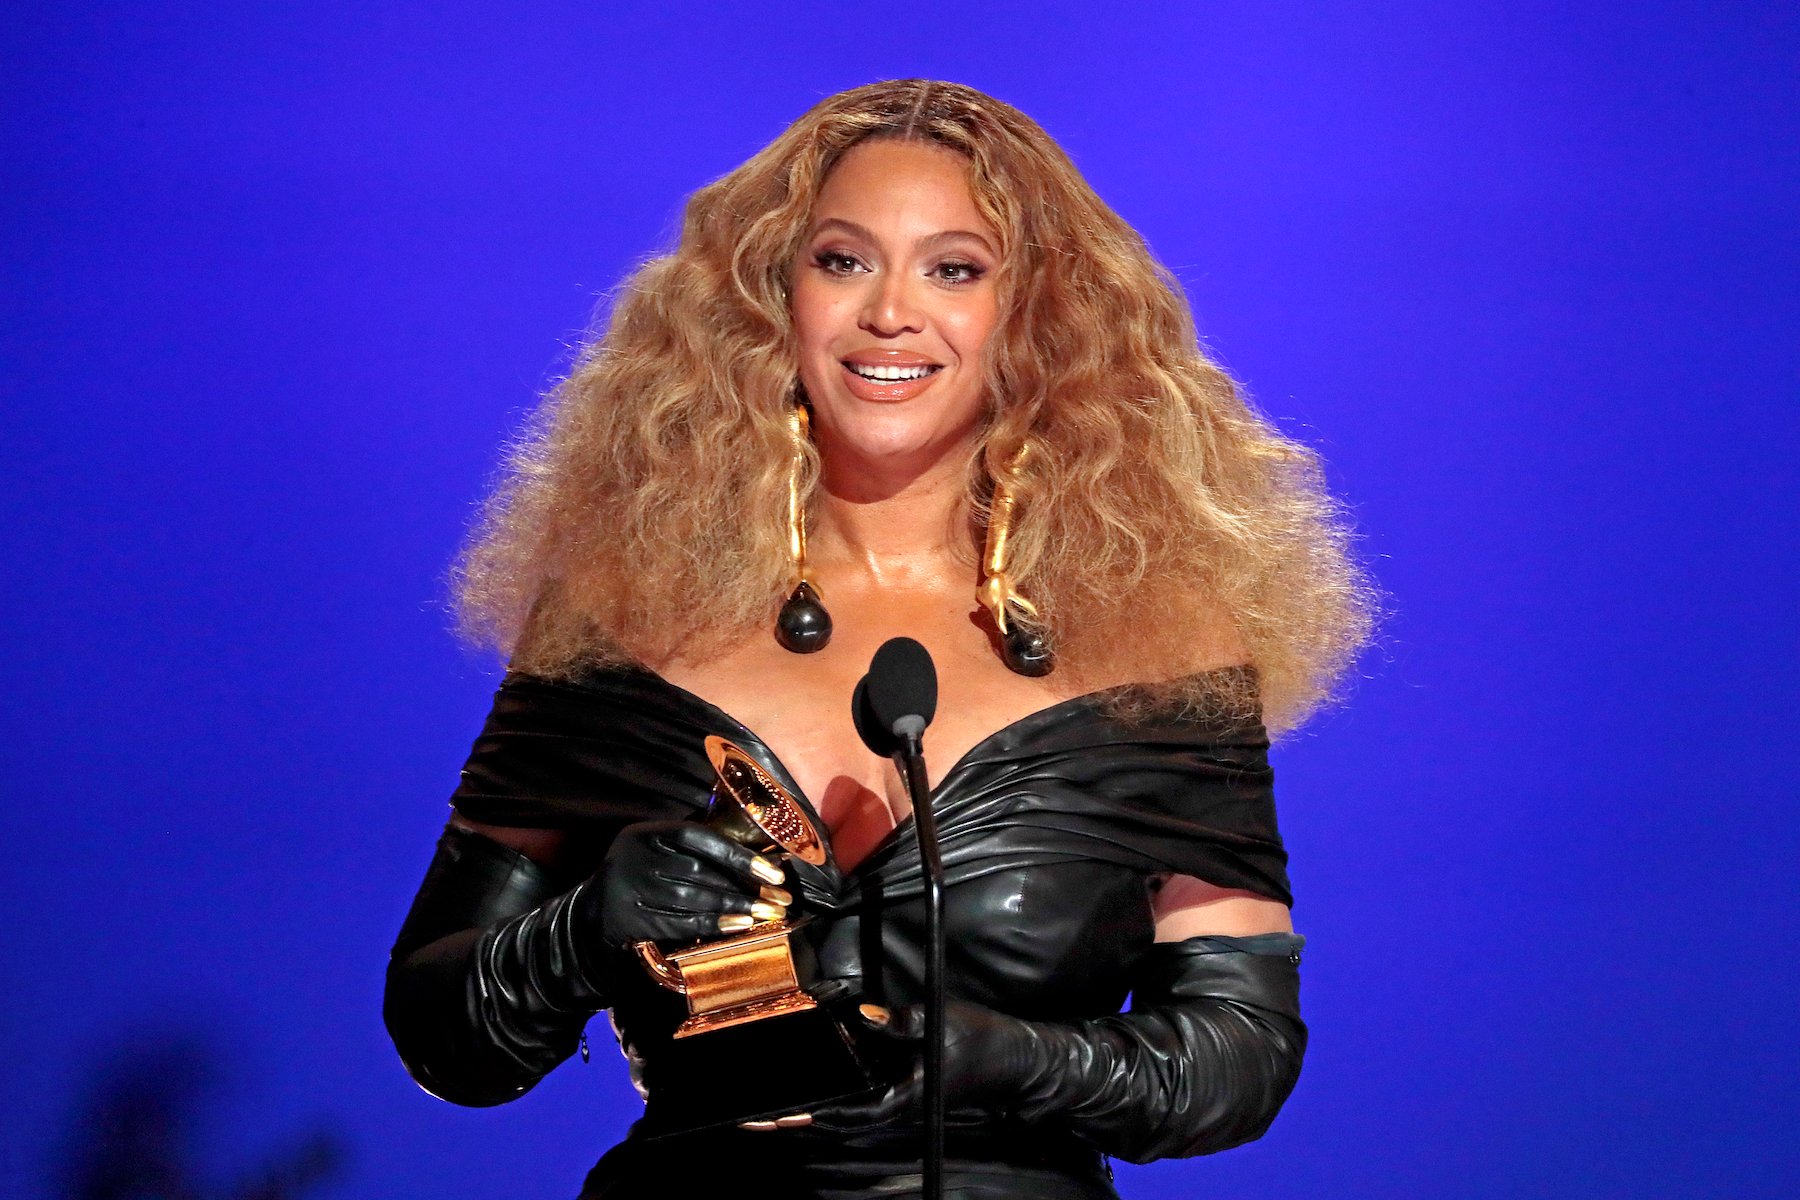 Beyoncé, who sampled a song by Right Said Fred, wearing a black dress against a blue backdrop